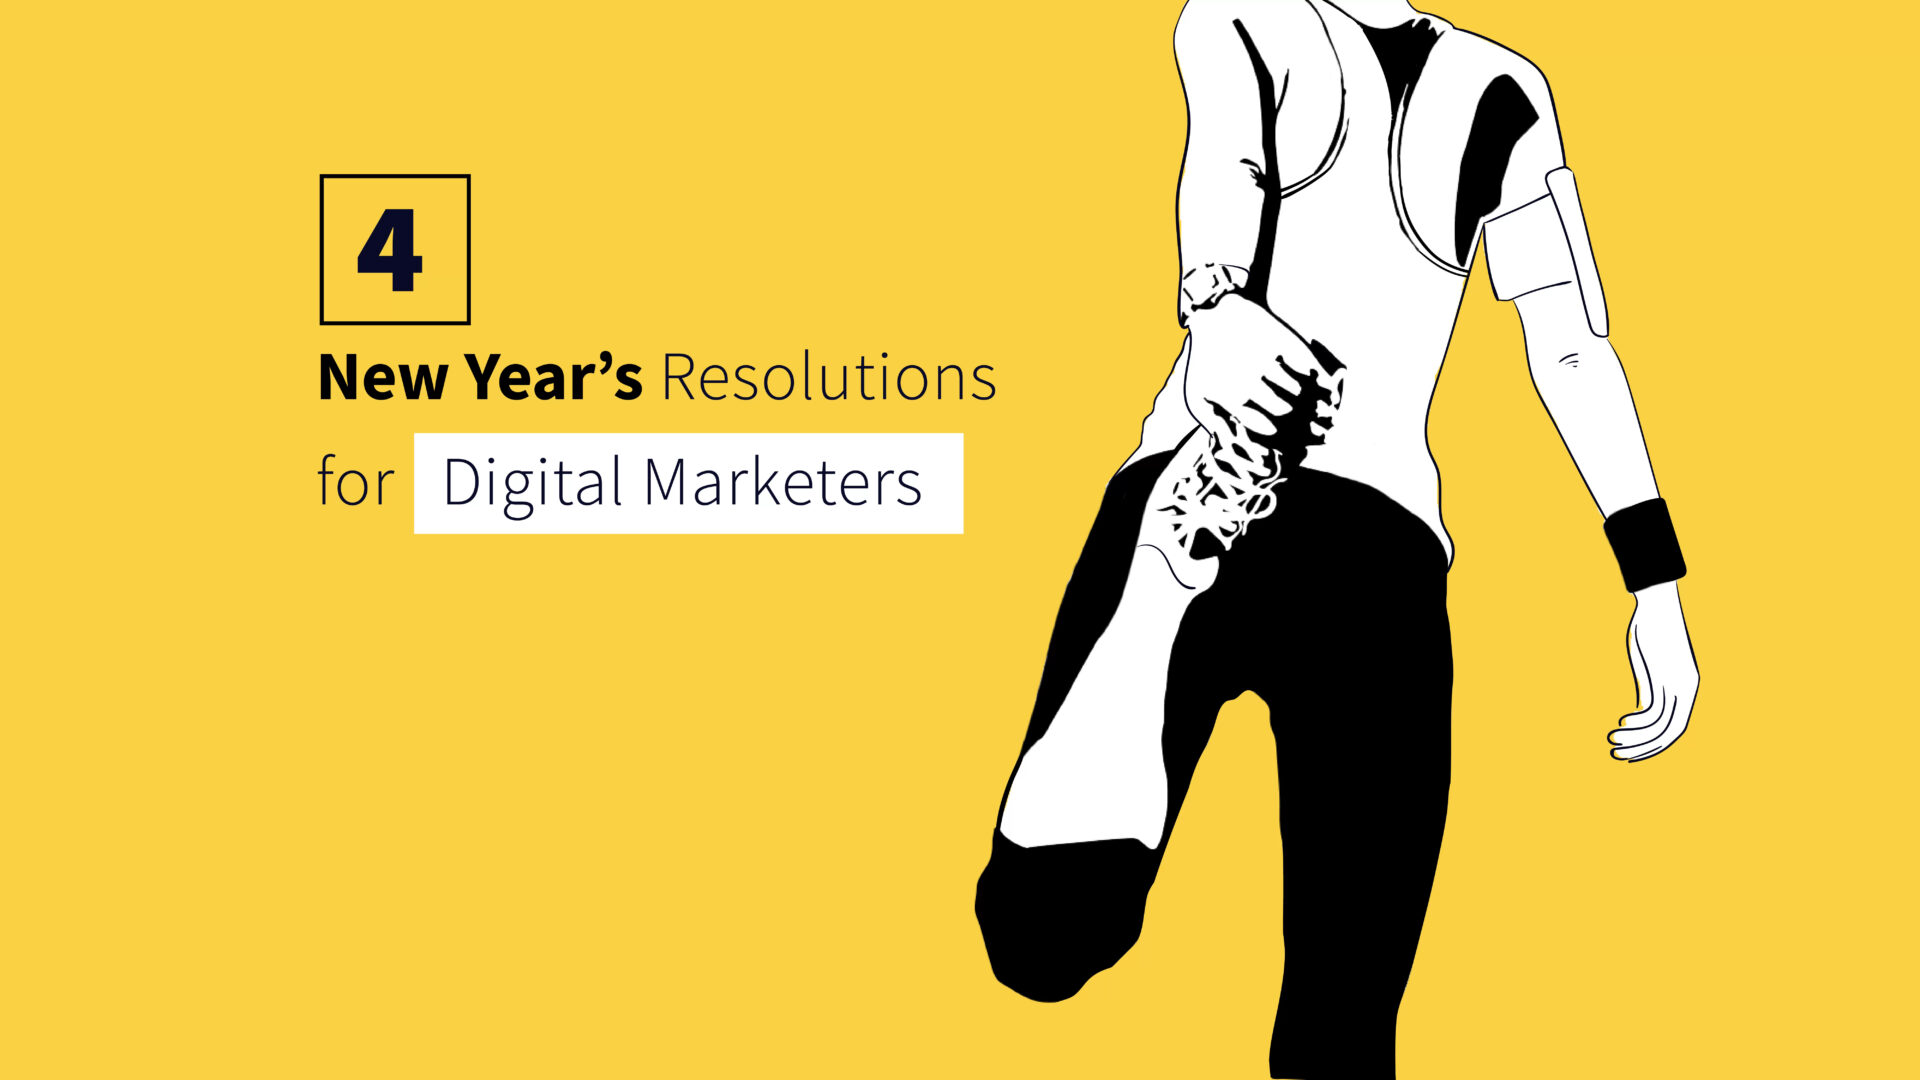 4 New Year’s Resolutions for Digital Marketers